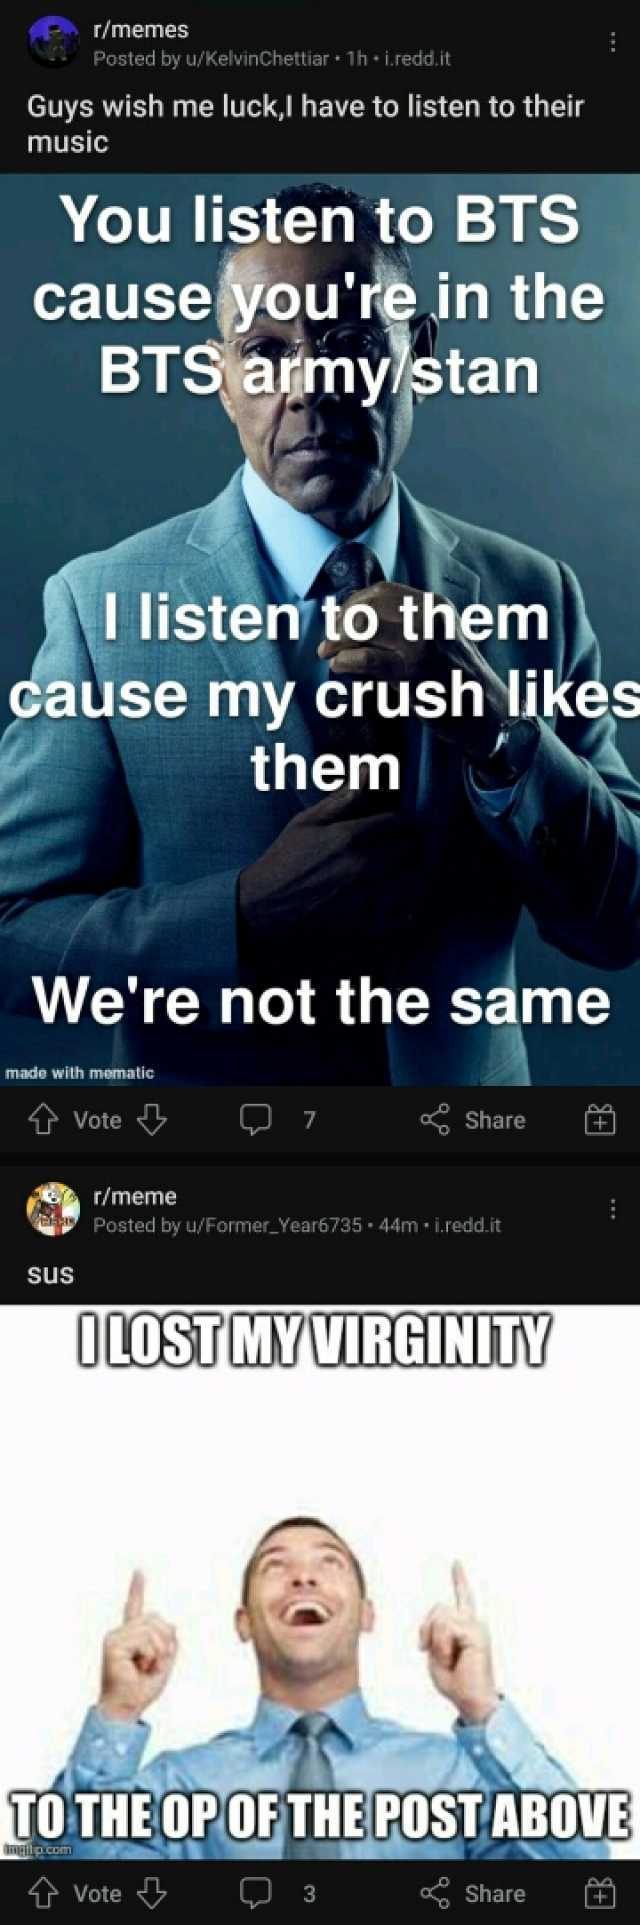 r/memes Posted by u/KelvinChettiar 1h i.redd.it Guys wish me luckl have to listen to their music You listen to BTS cause youre in the BTS army/stan I listen to them cause my crush likes them Were not the same made with mematic tVo